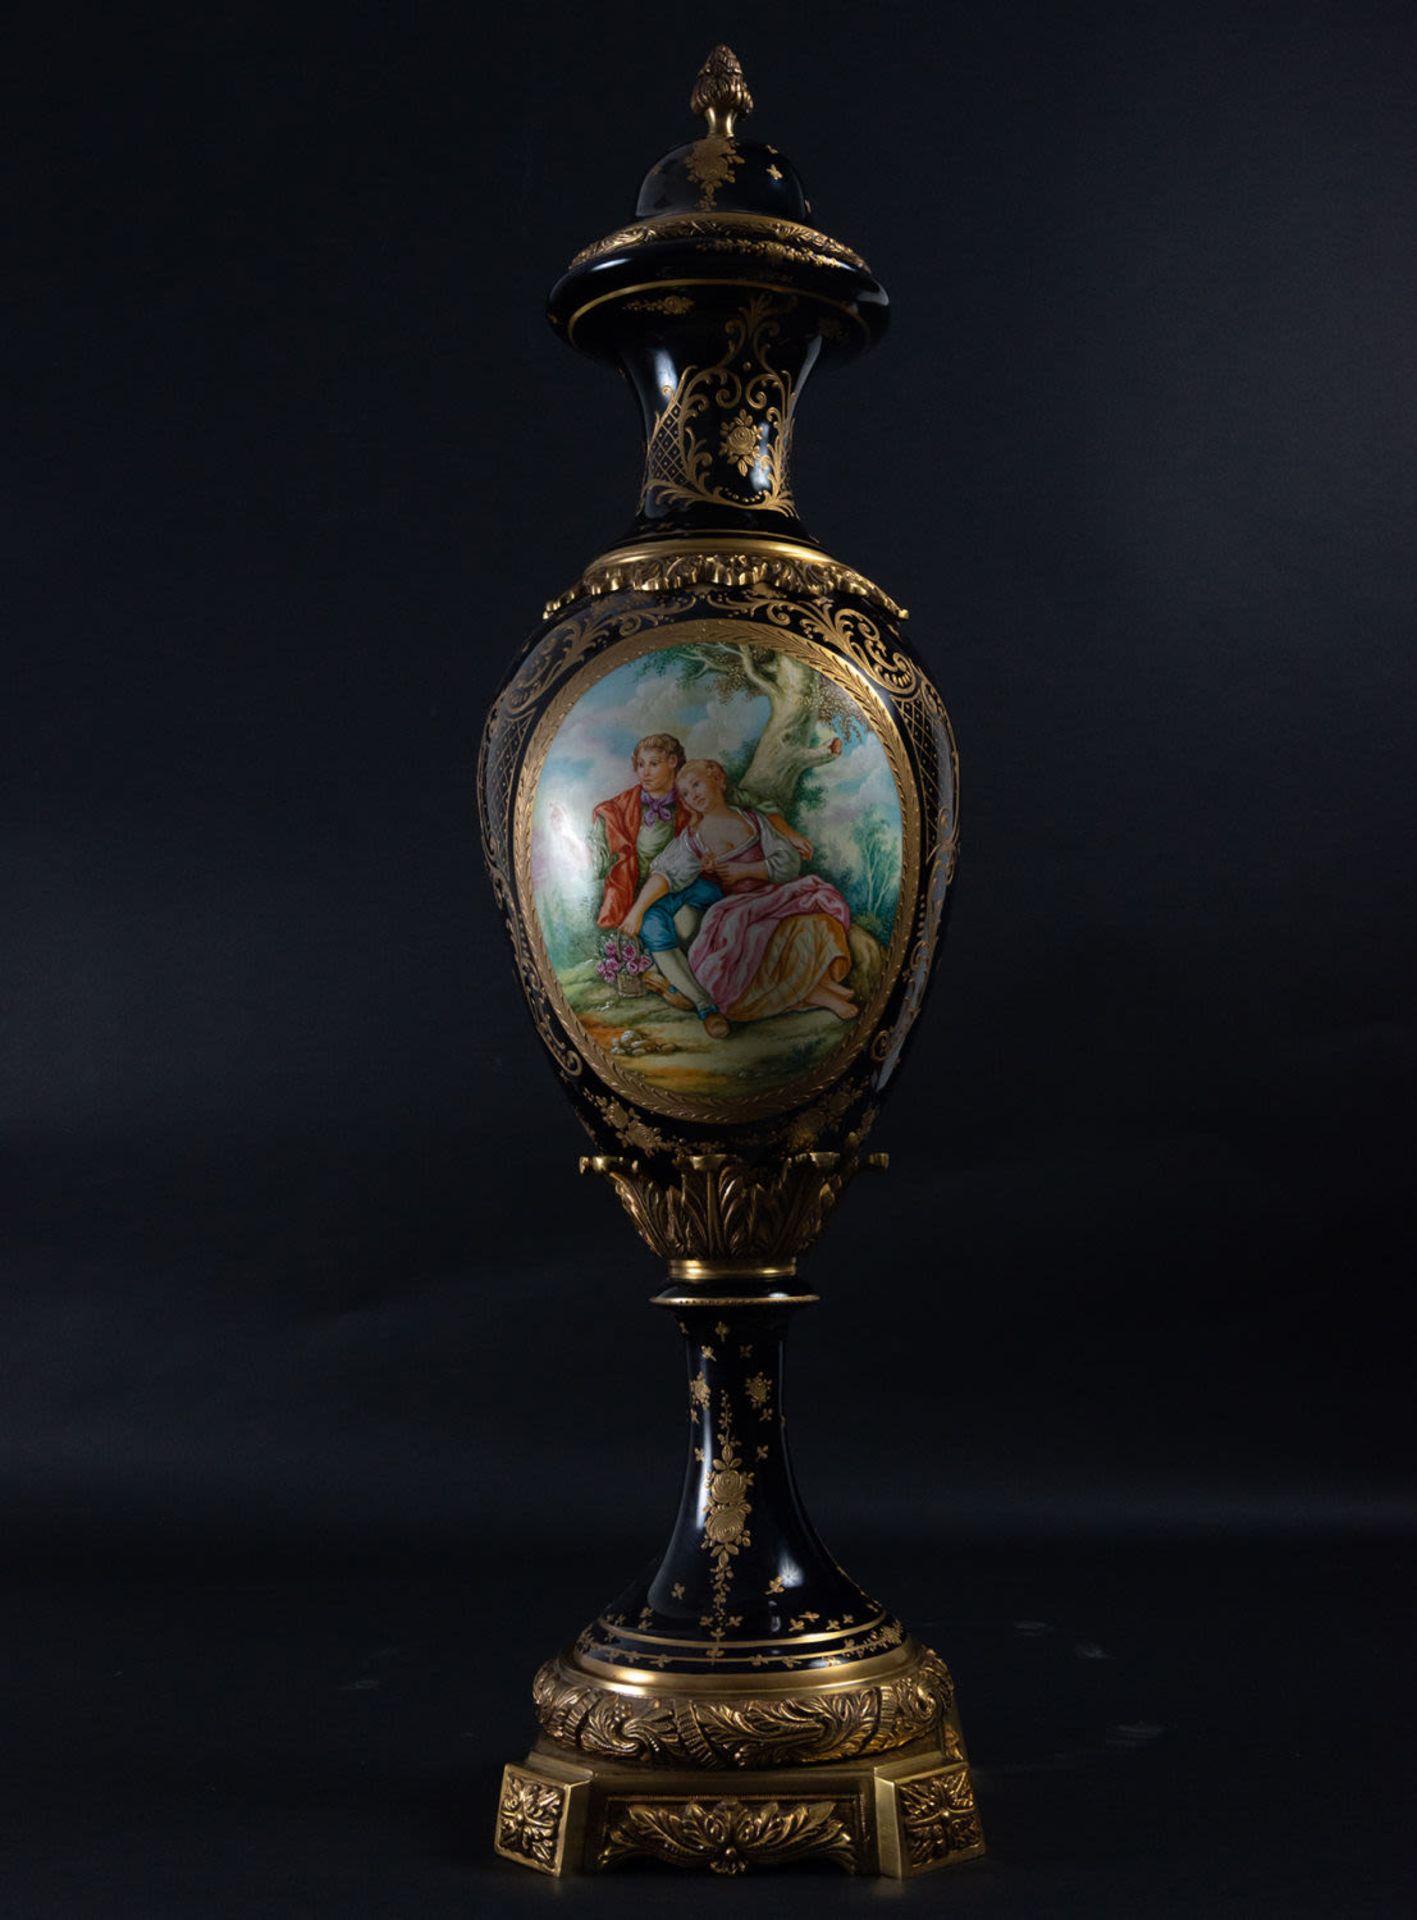 Pair of Large Vases in Polychrome Old Paris Tender Porcelain, late 19th century - Image 2 of 11